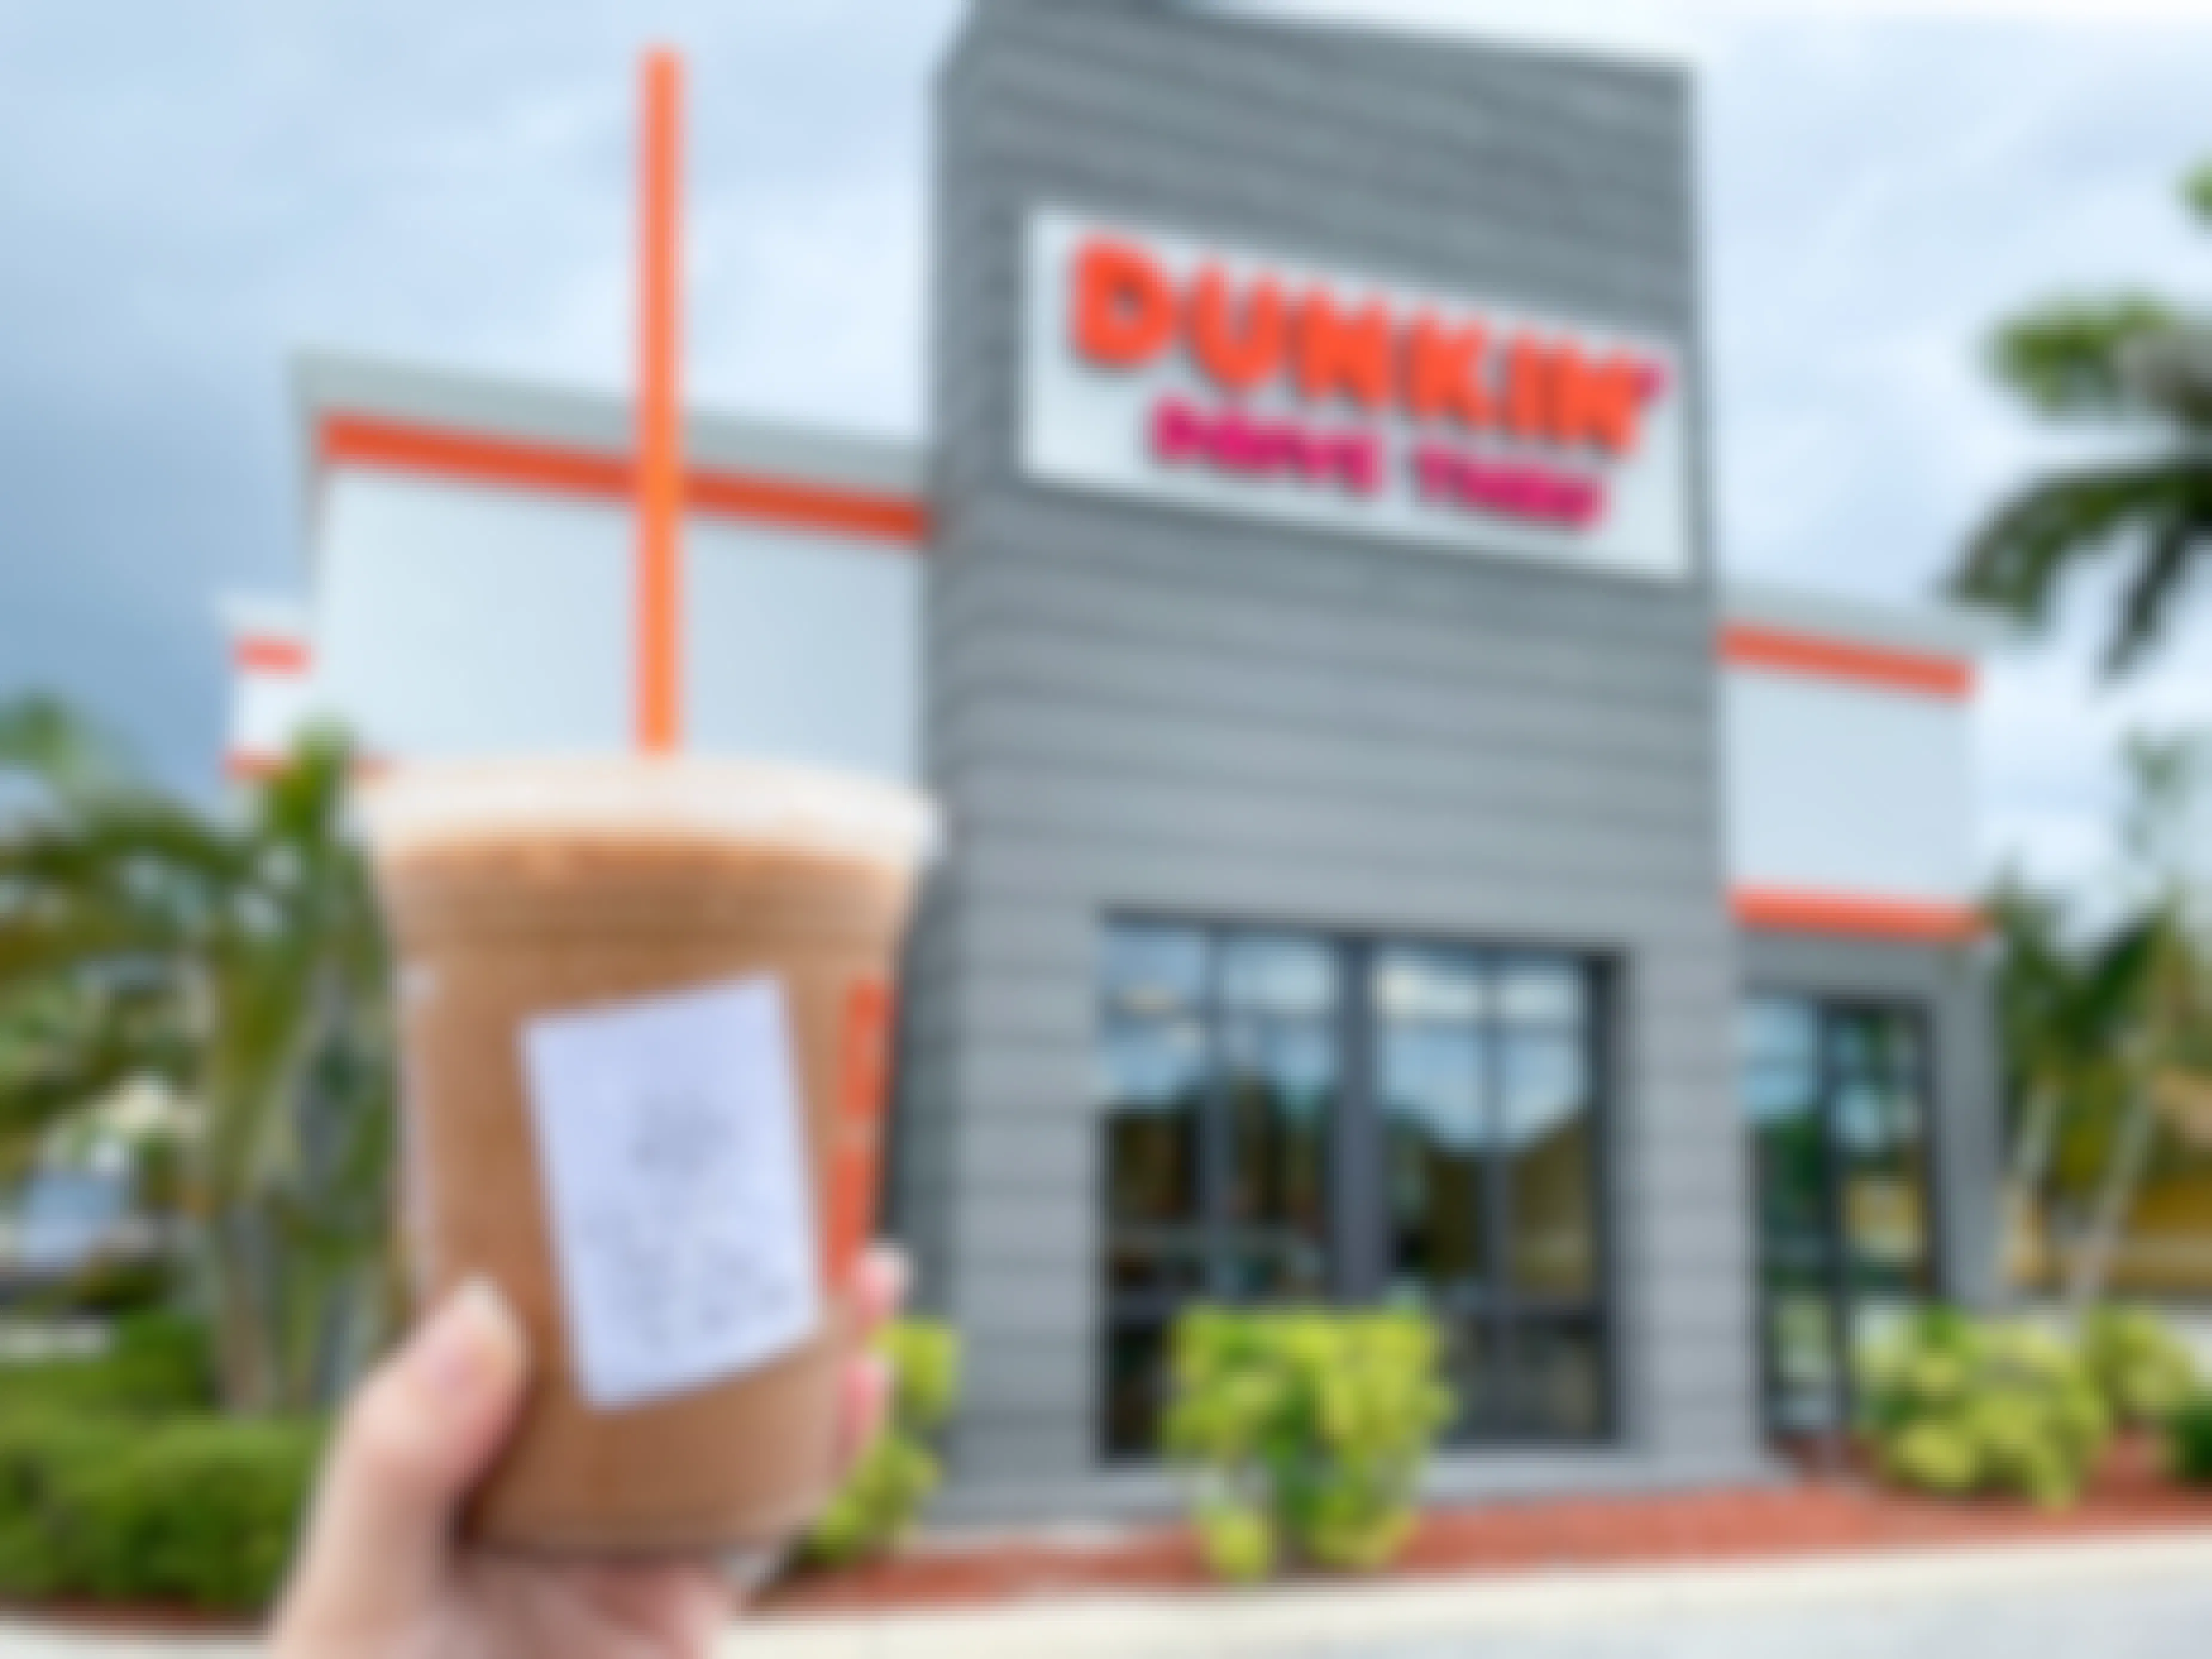 A person's hand holding up a specialty iced Dunkin Donuts coffee outside of a Dunkin restaurant.